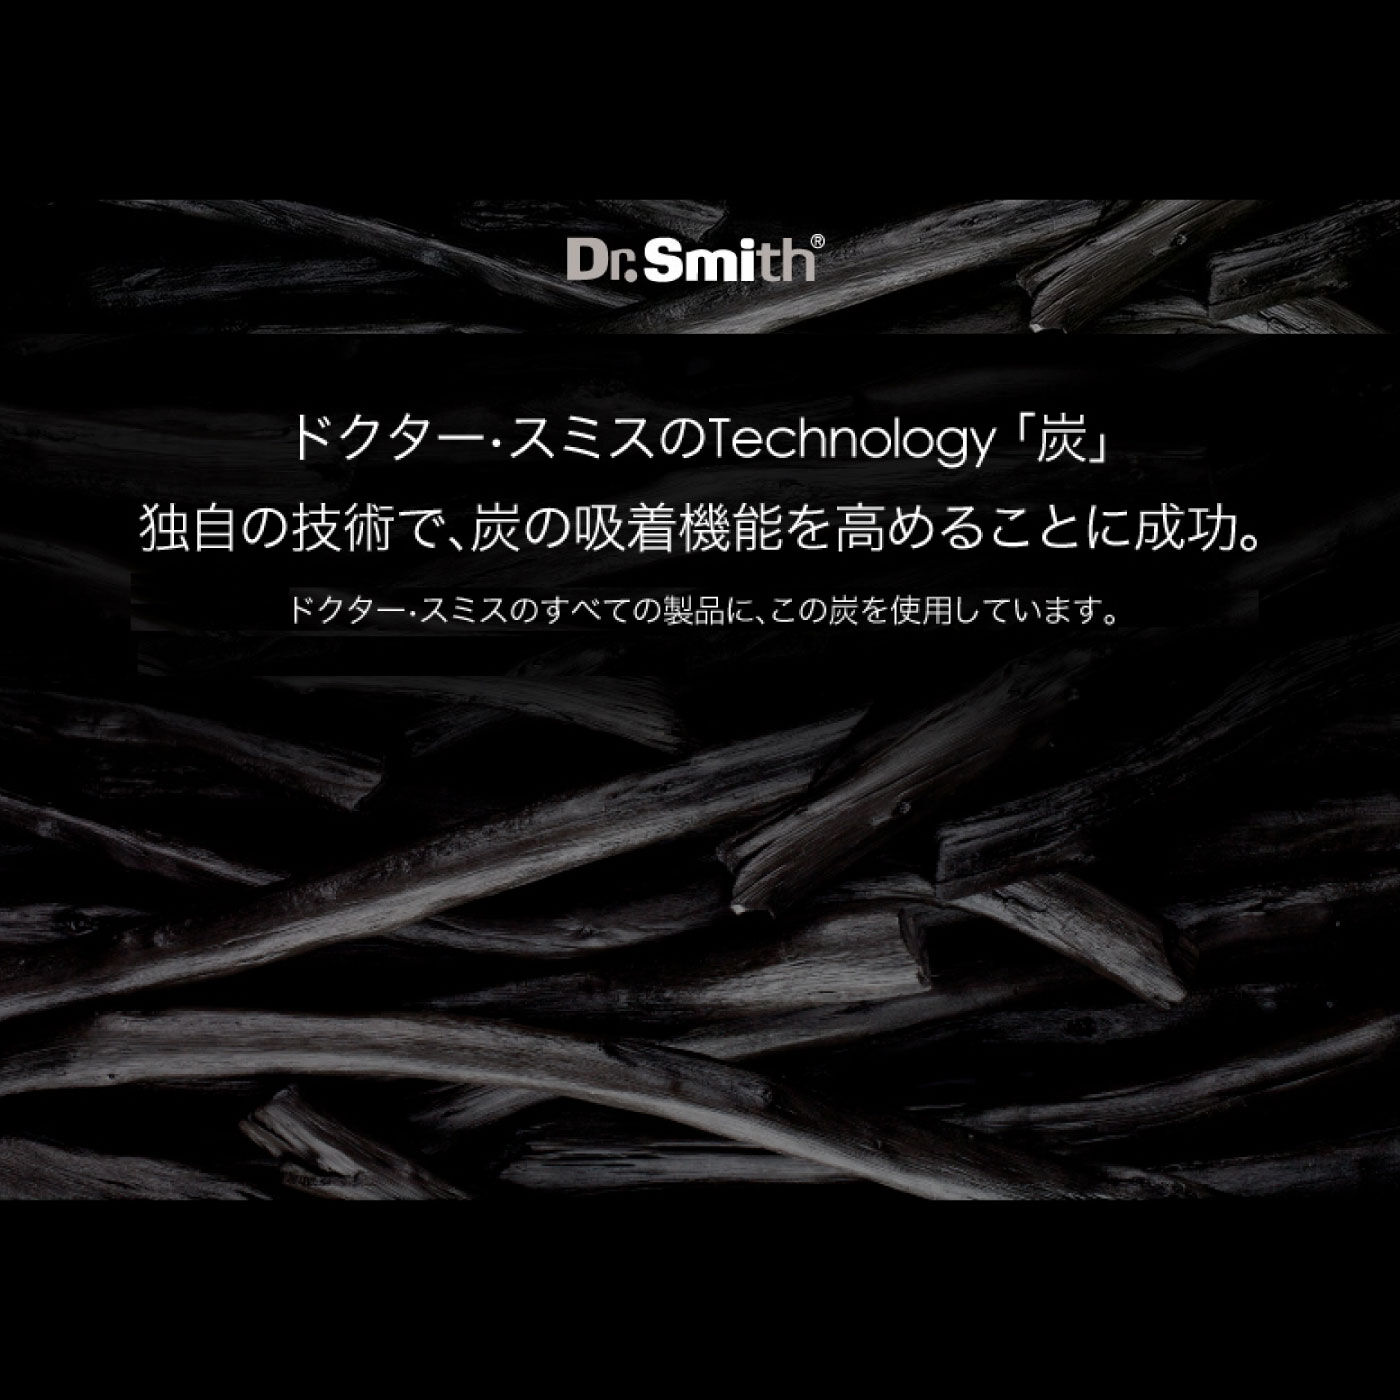 FELISSIMO PARTNERS|さわやかな朝のめざめ　Dr．Smith　炭わた入り枕（大）